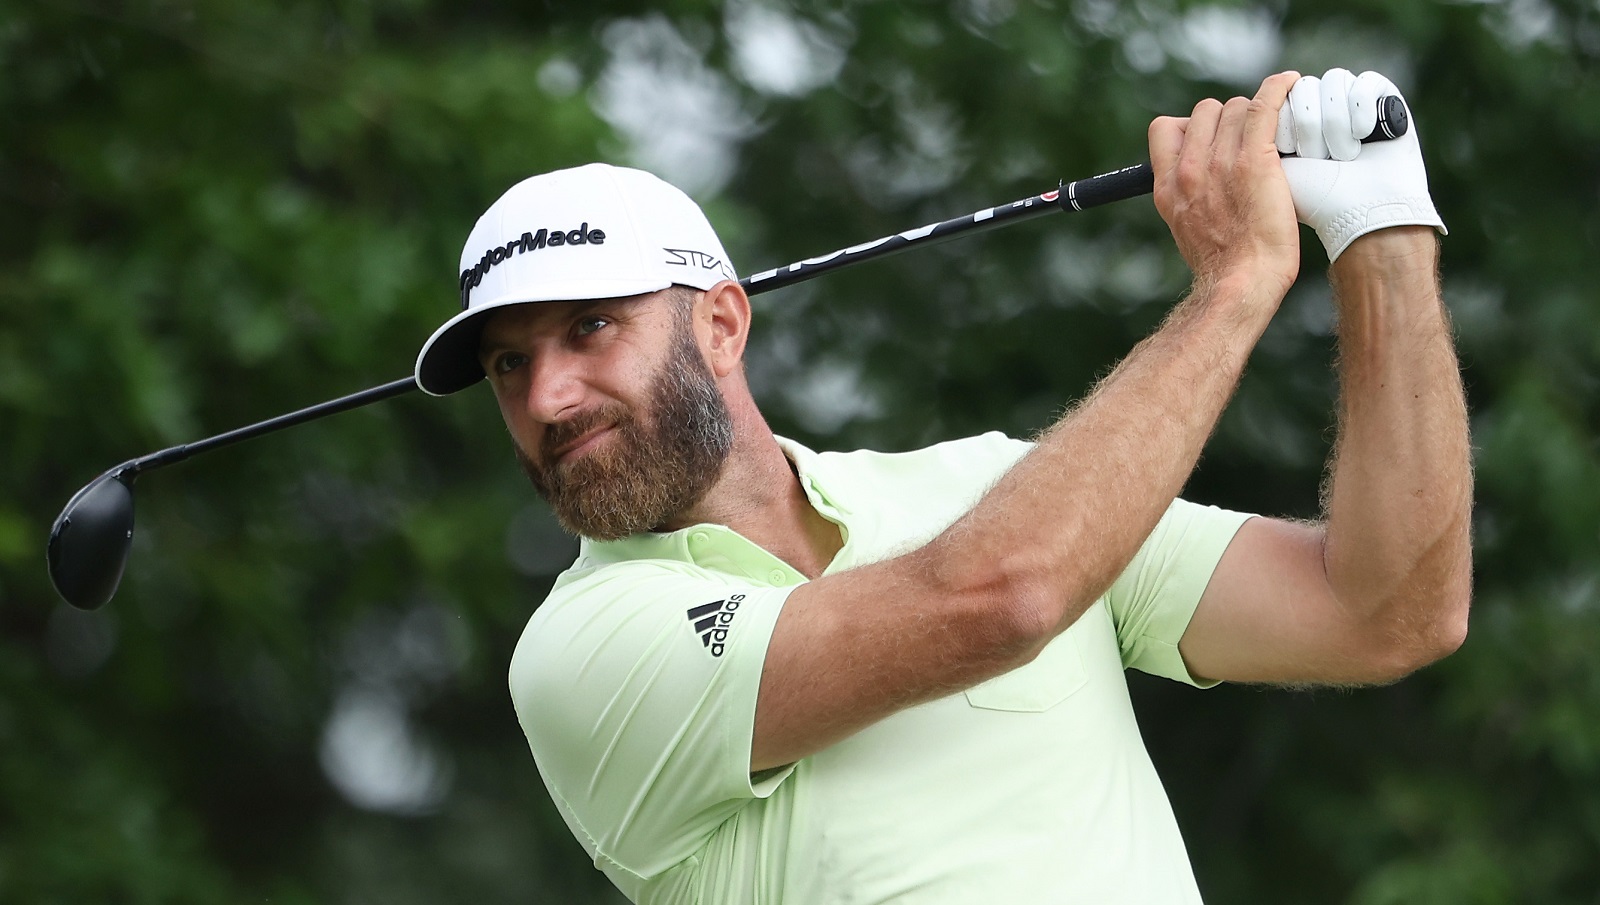 Dustin Johnson plays his shot from the 17th tee during the second round of the 2022 PGA Championship at Southern Hills Country Club on May 20, 2022 in Tulsa, Oklahoma.